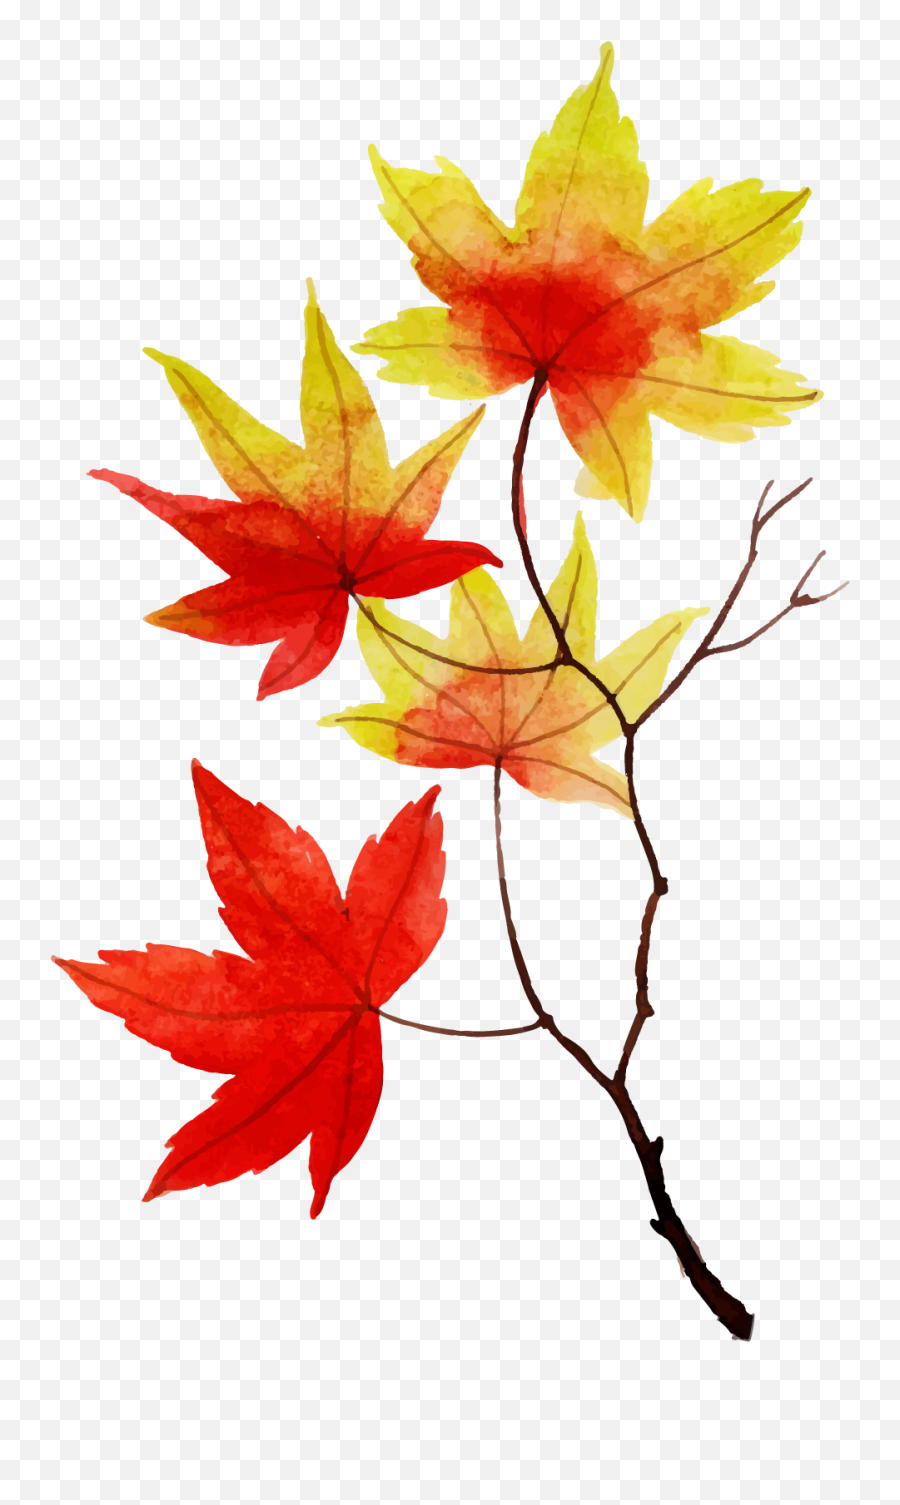 Canadian Leaf Png - Maple Leaf 5527485 Vippng Lovely,Maple Png